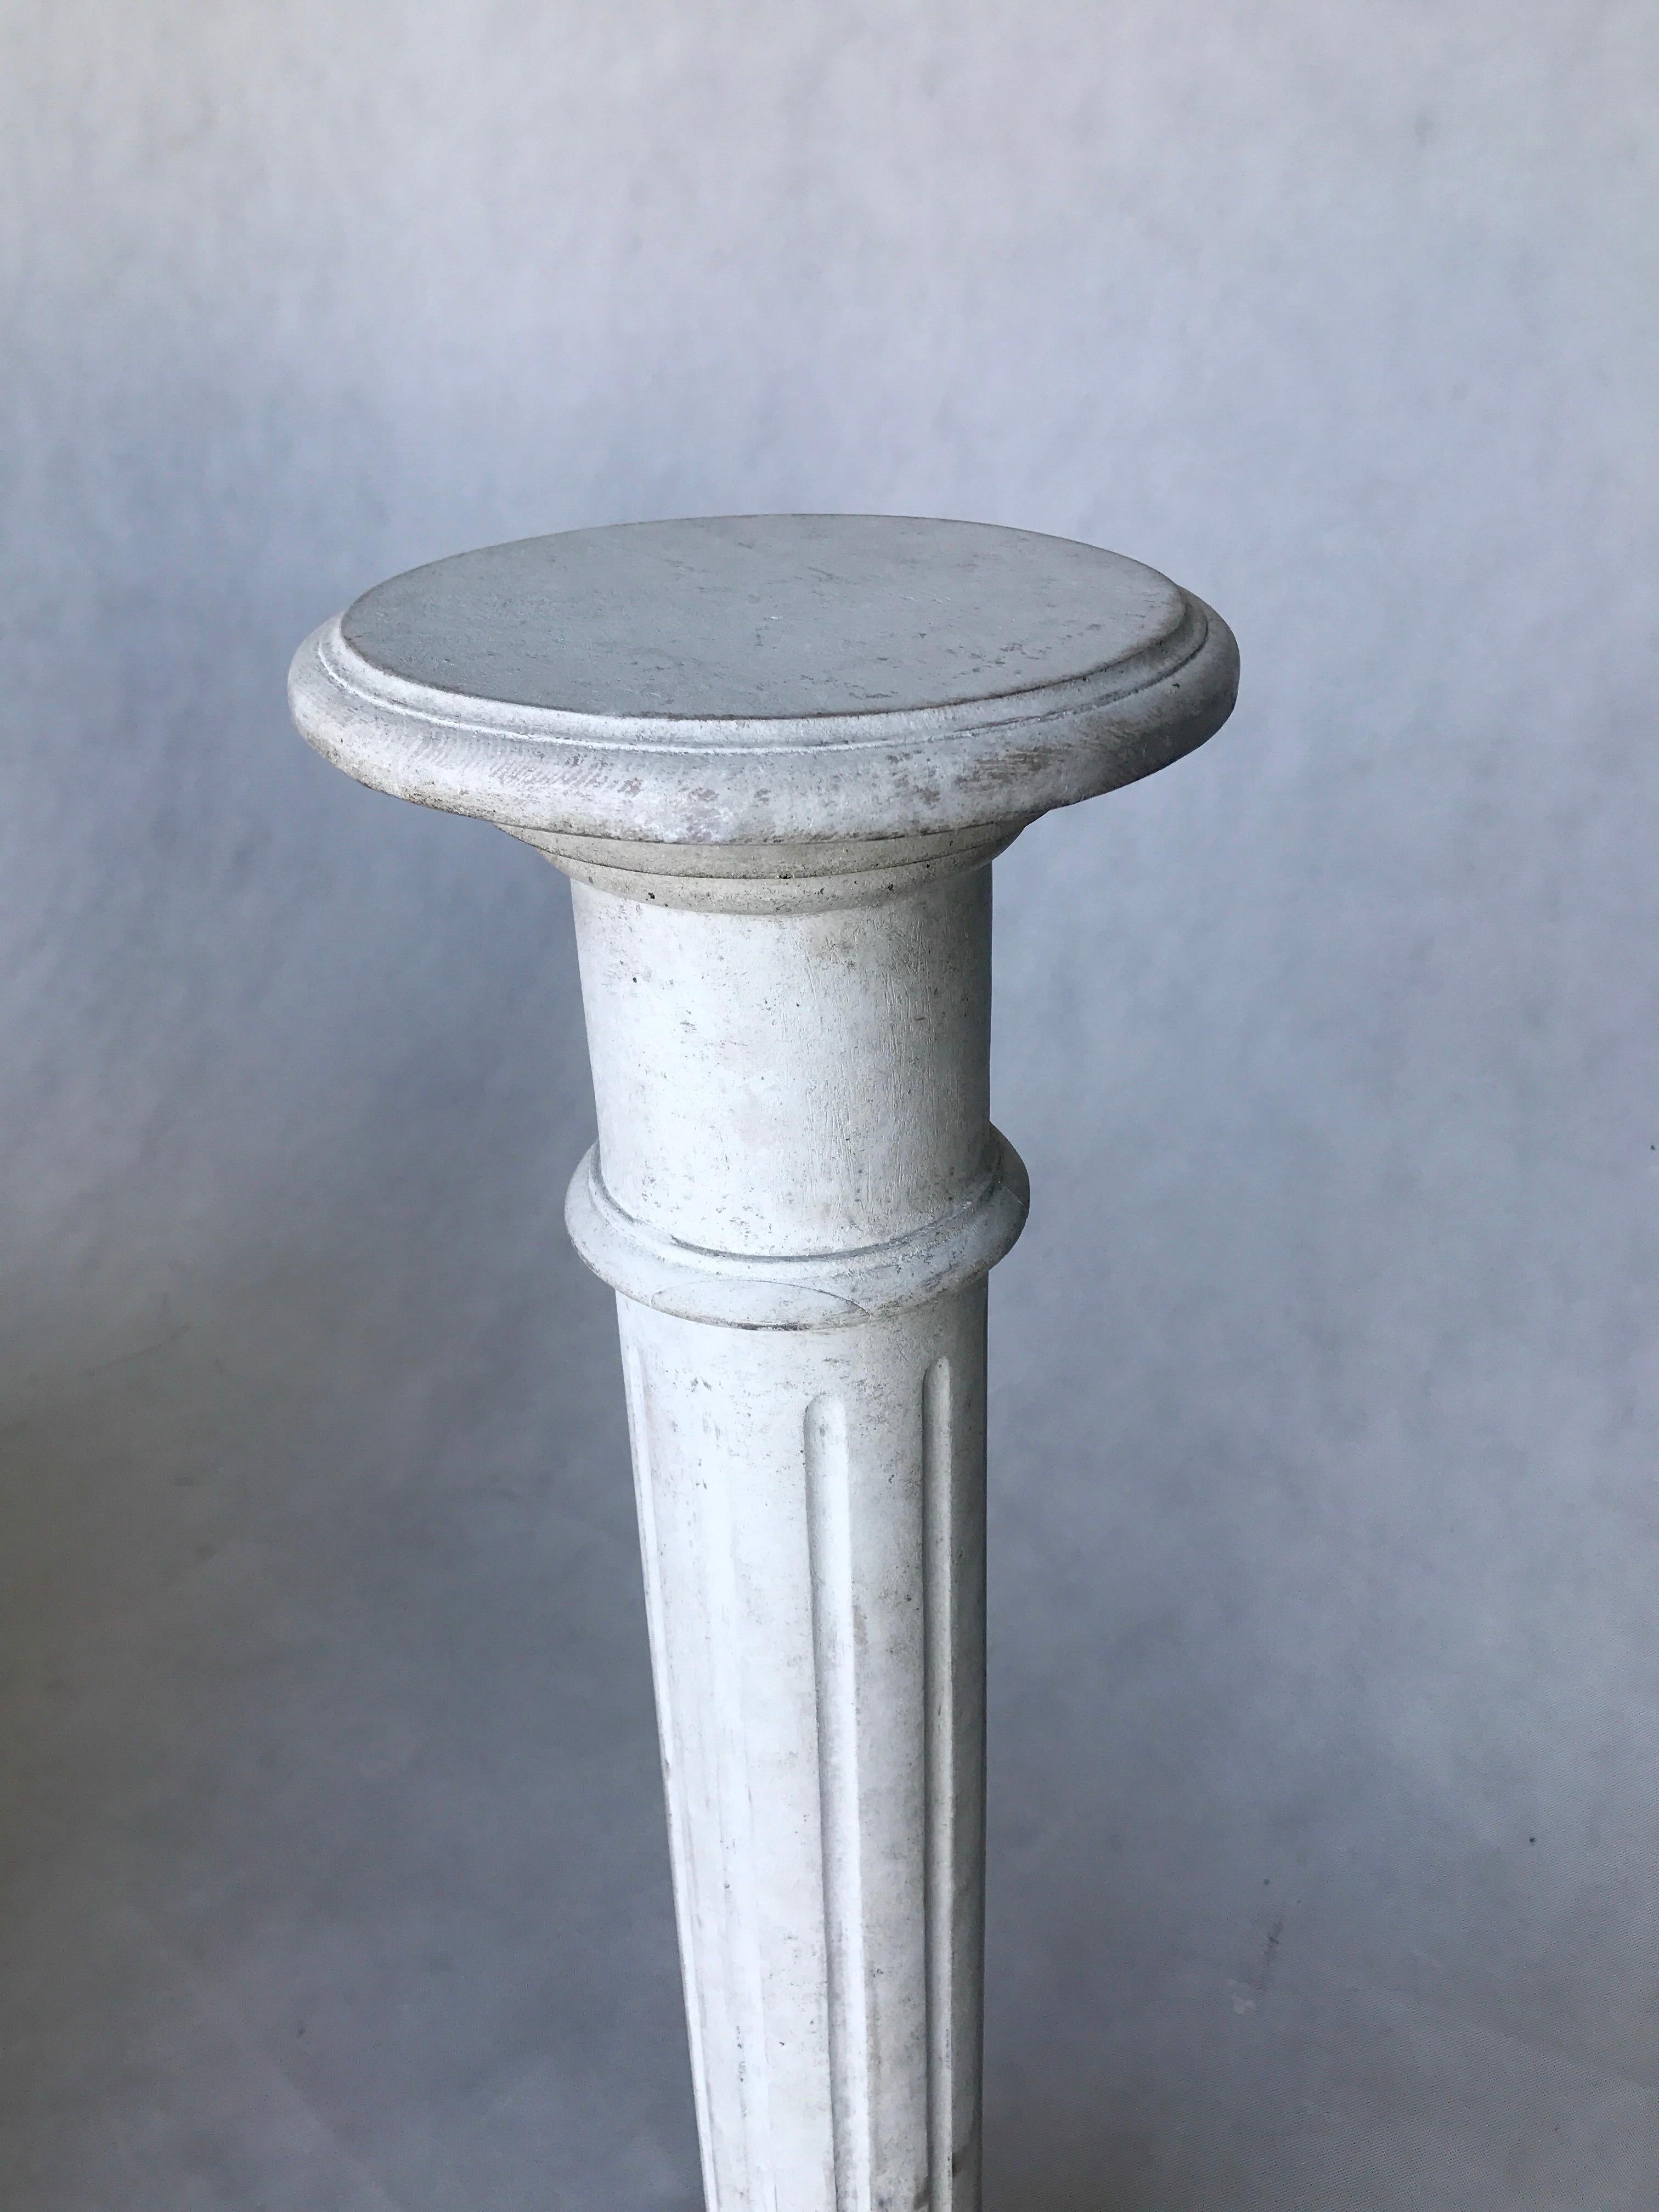 This slender column from the Gustavian Style is made of white-lacquered wood. The piece features vertical ornamental indents, a square base, and a rounded top.